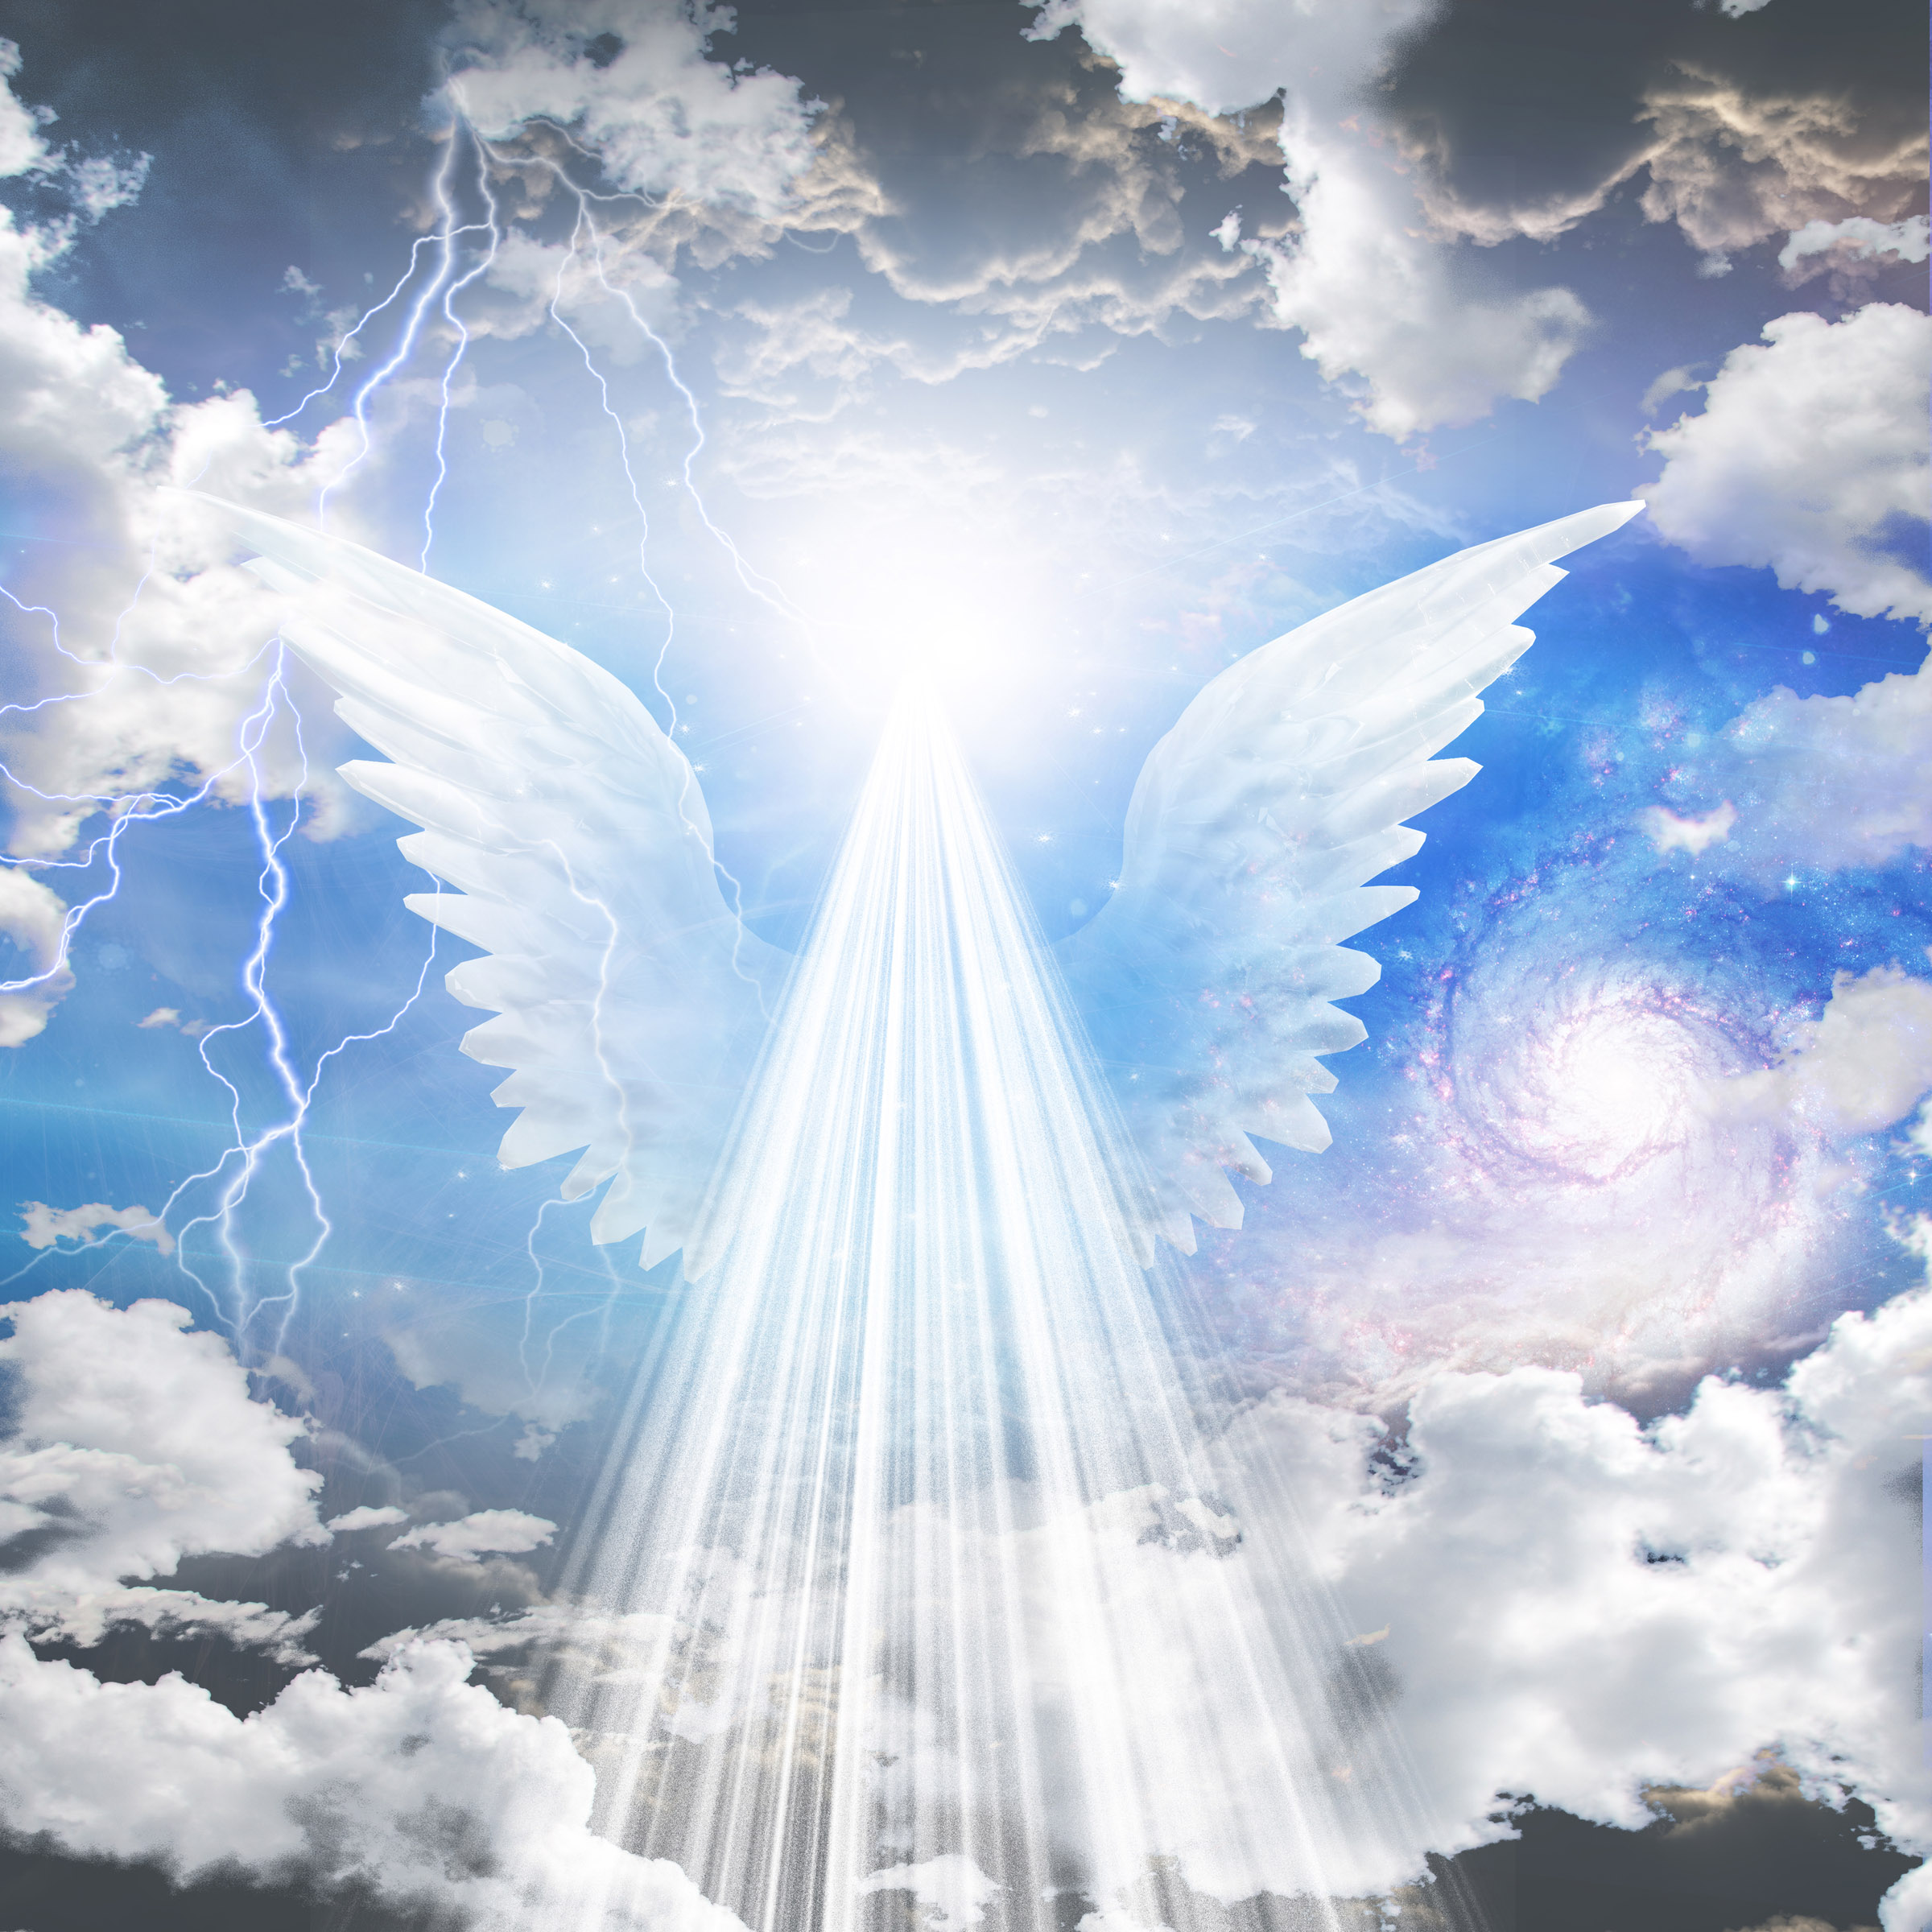 Spiritual Support Through Your Spirit Guides - Find out more about your heavenly support system.